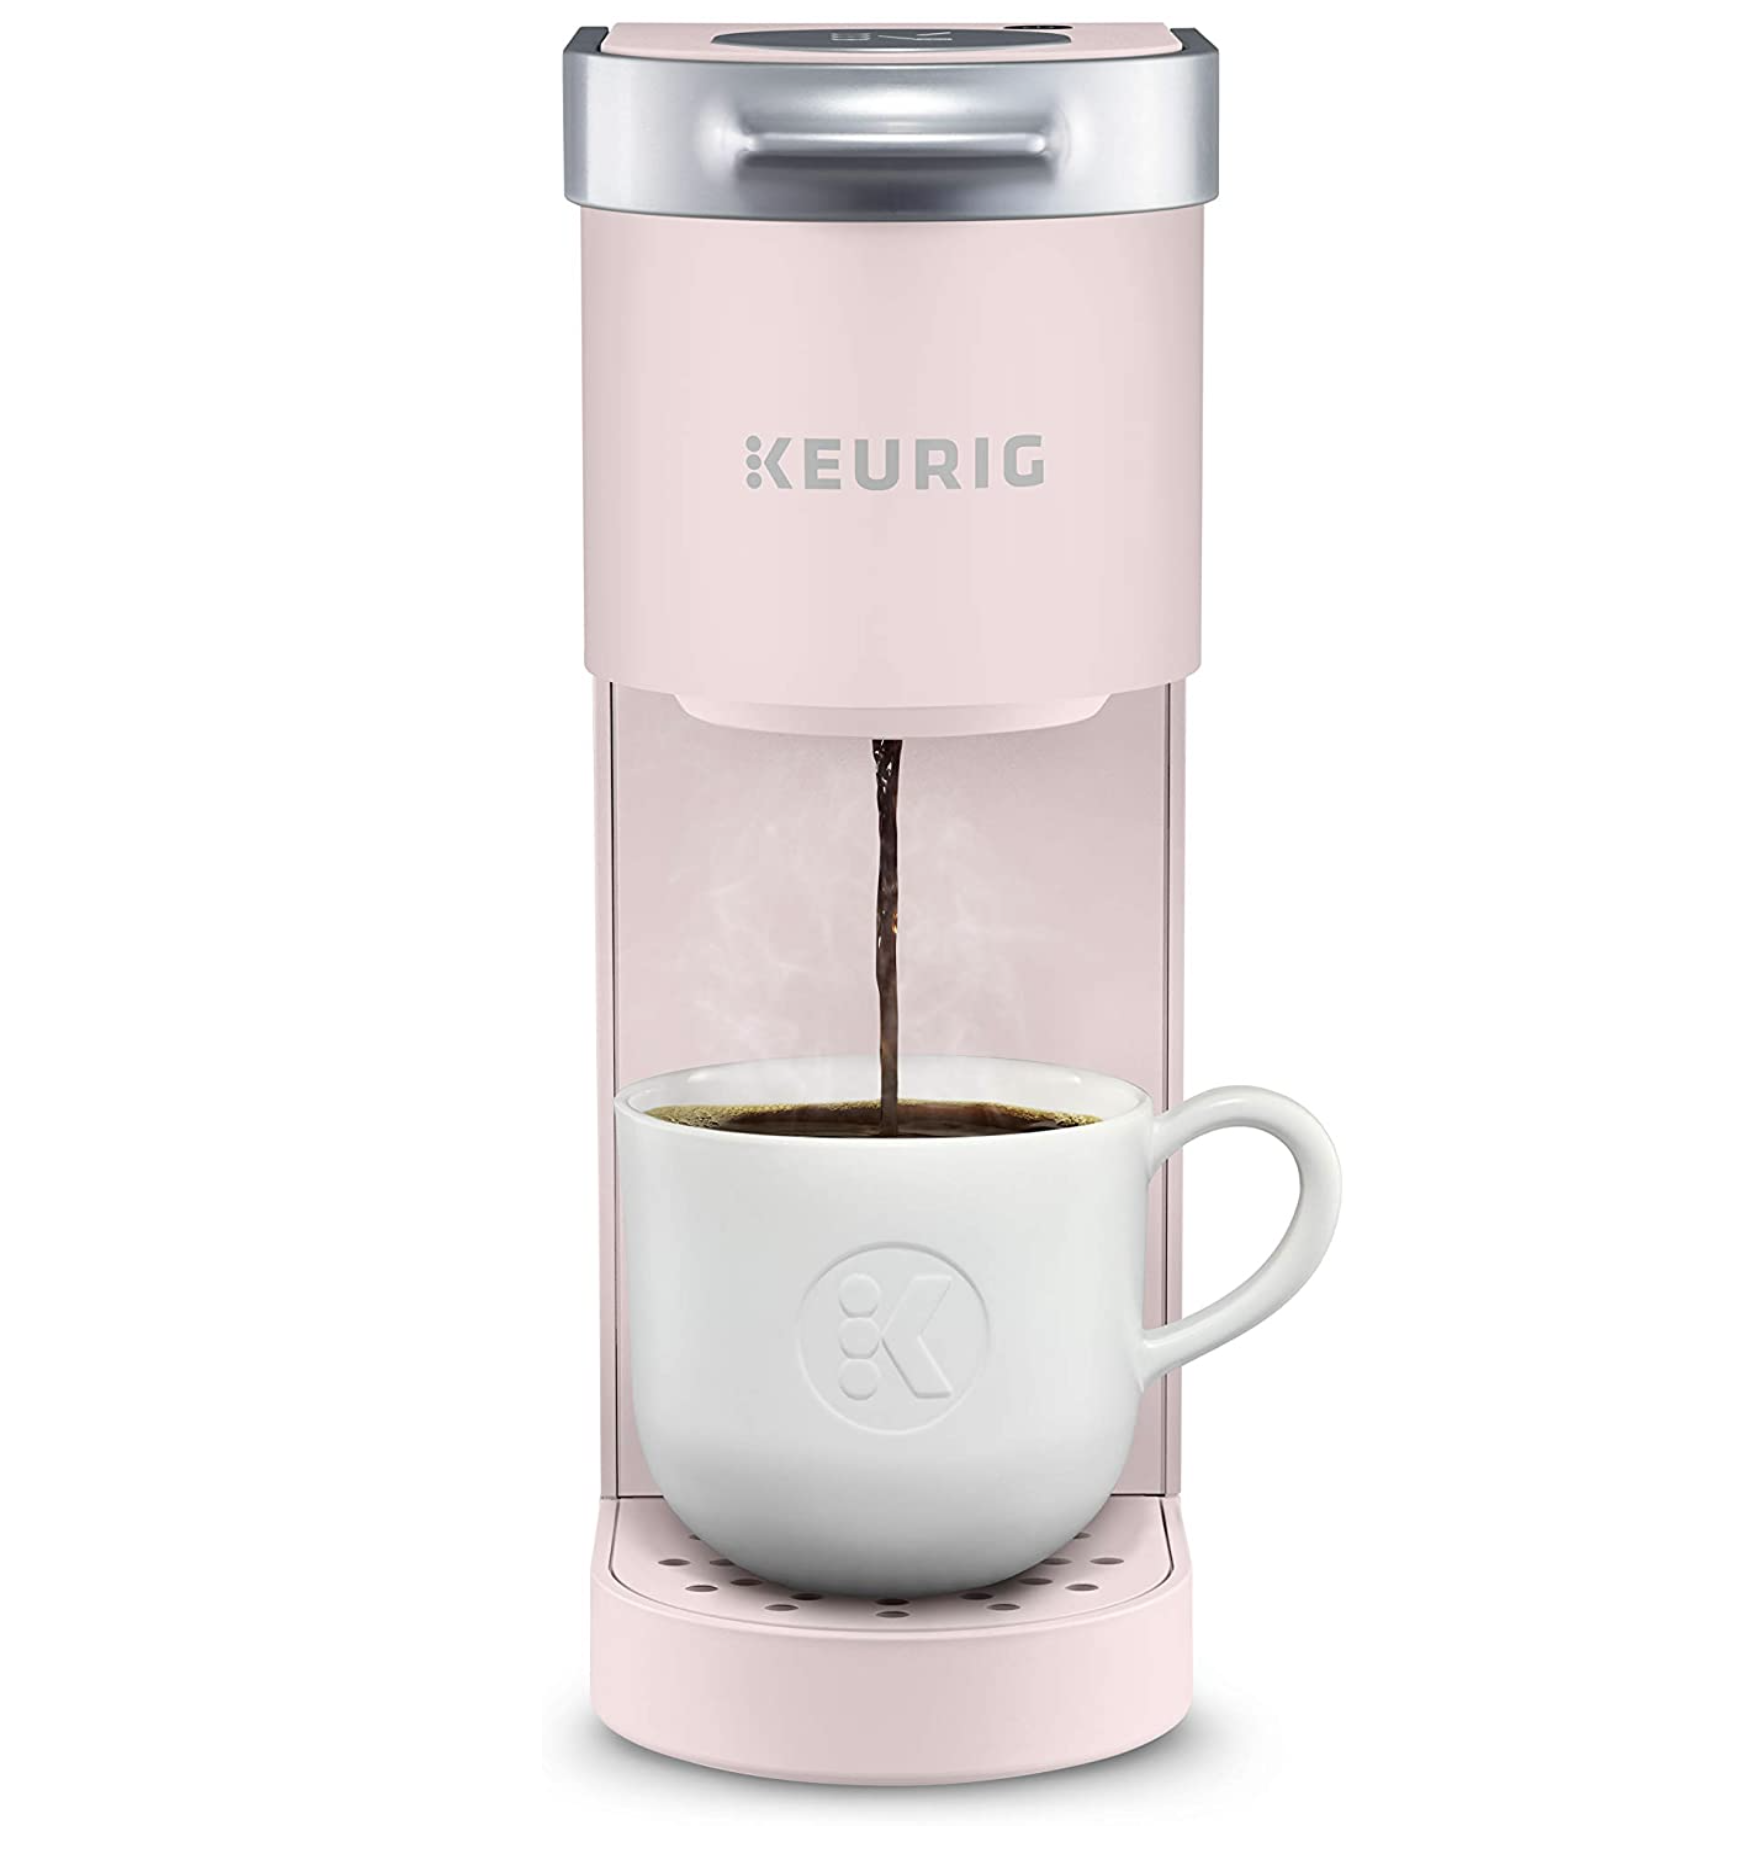 How to Choose the Perfect Color for Your Keurig K-Mini Coffee Maker